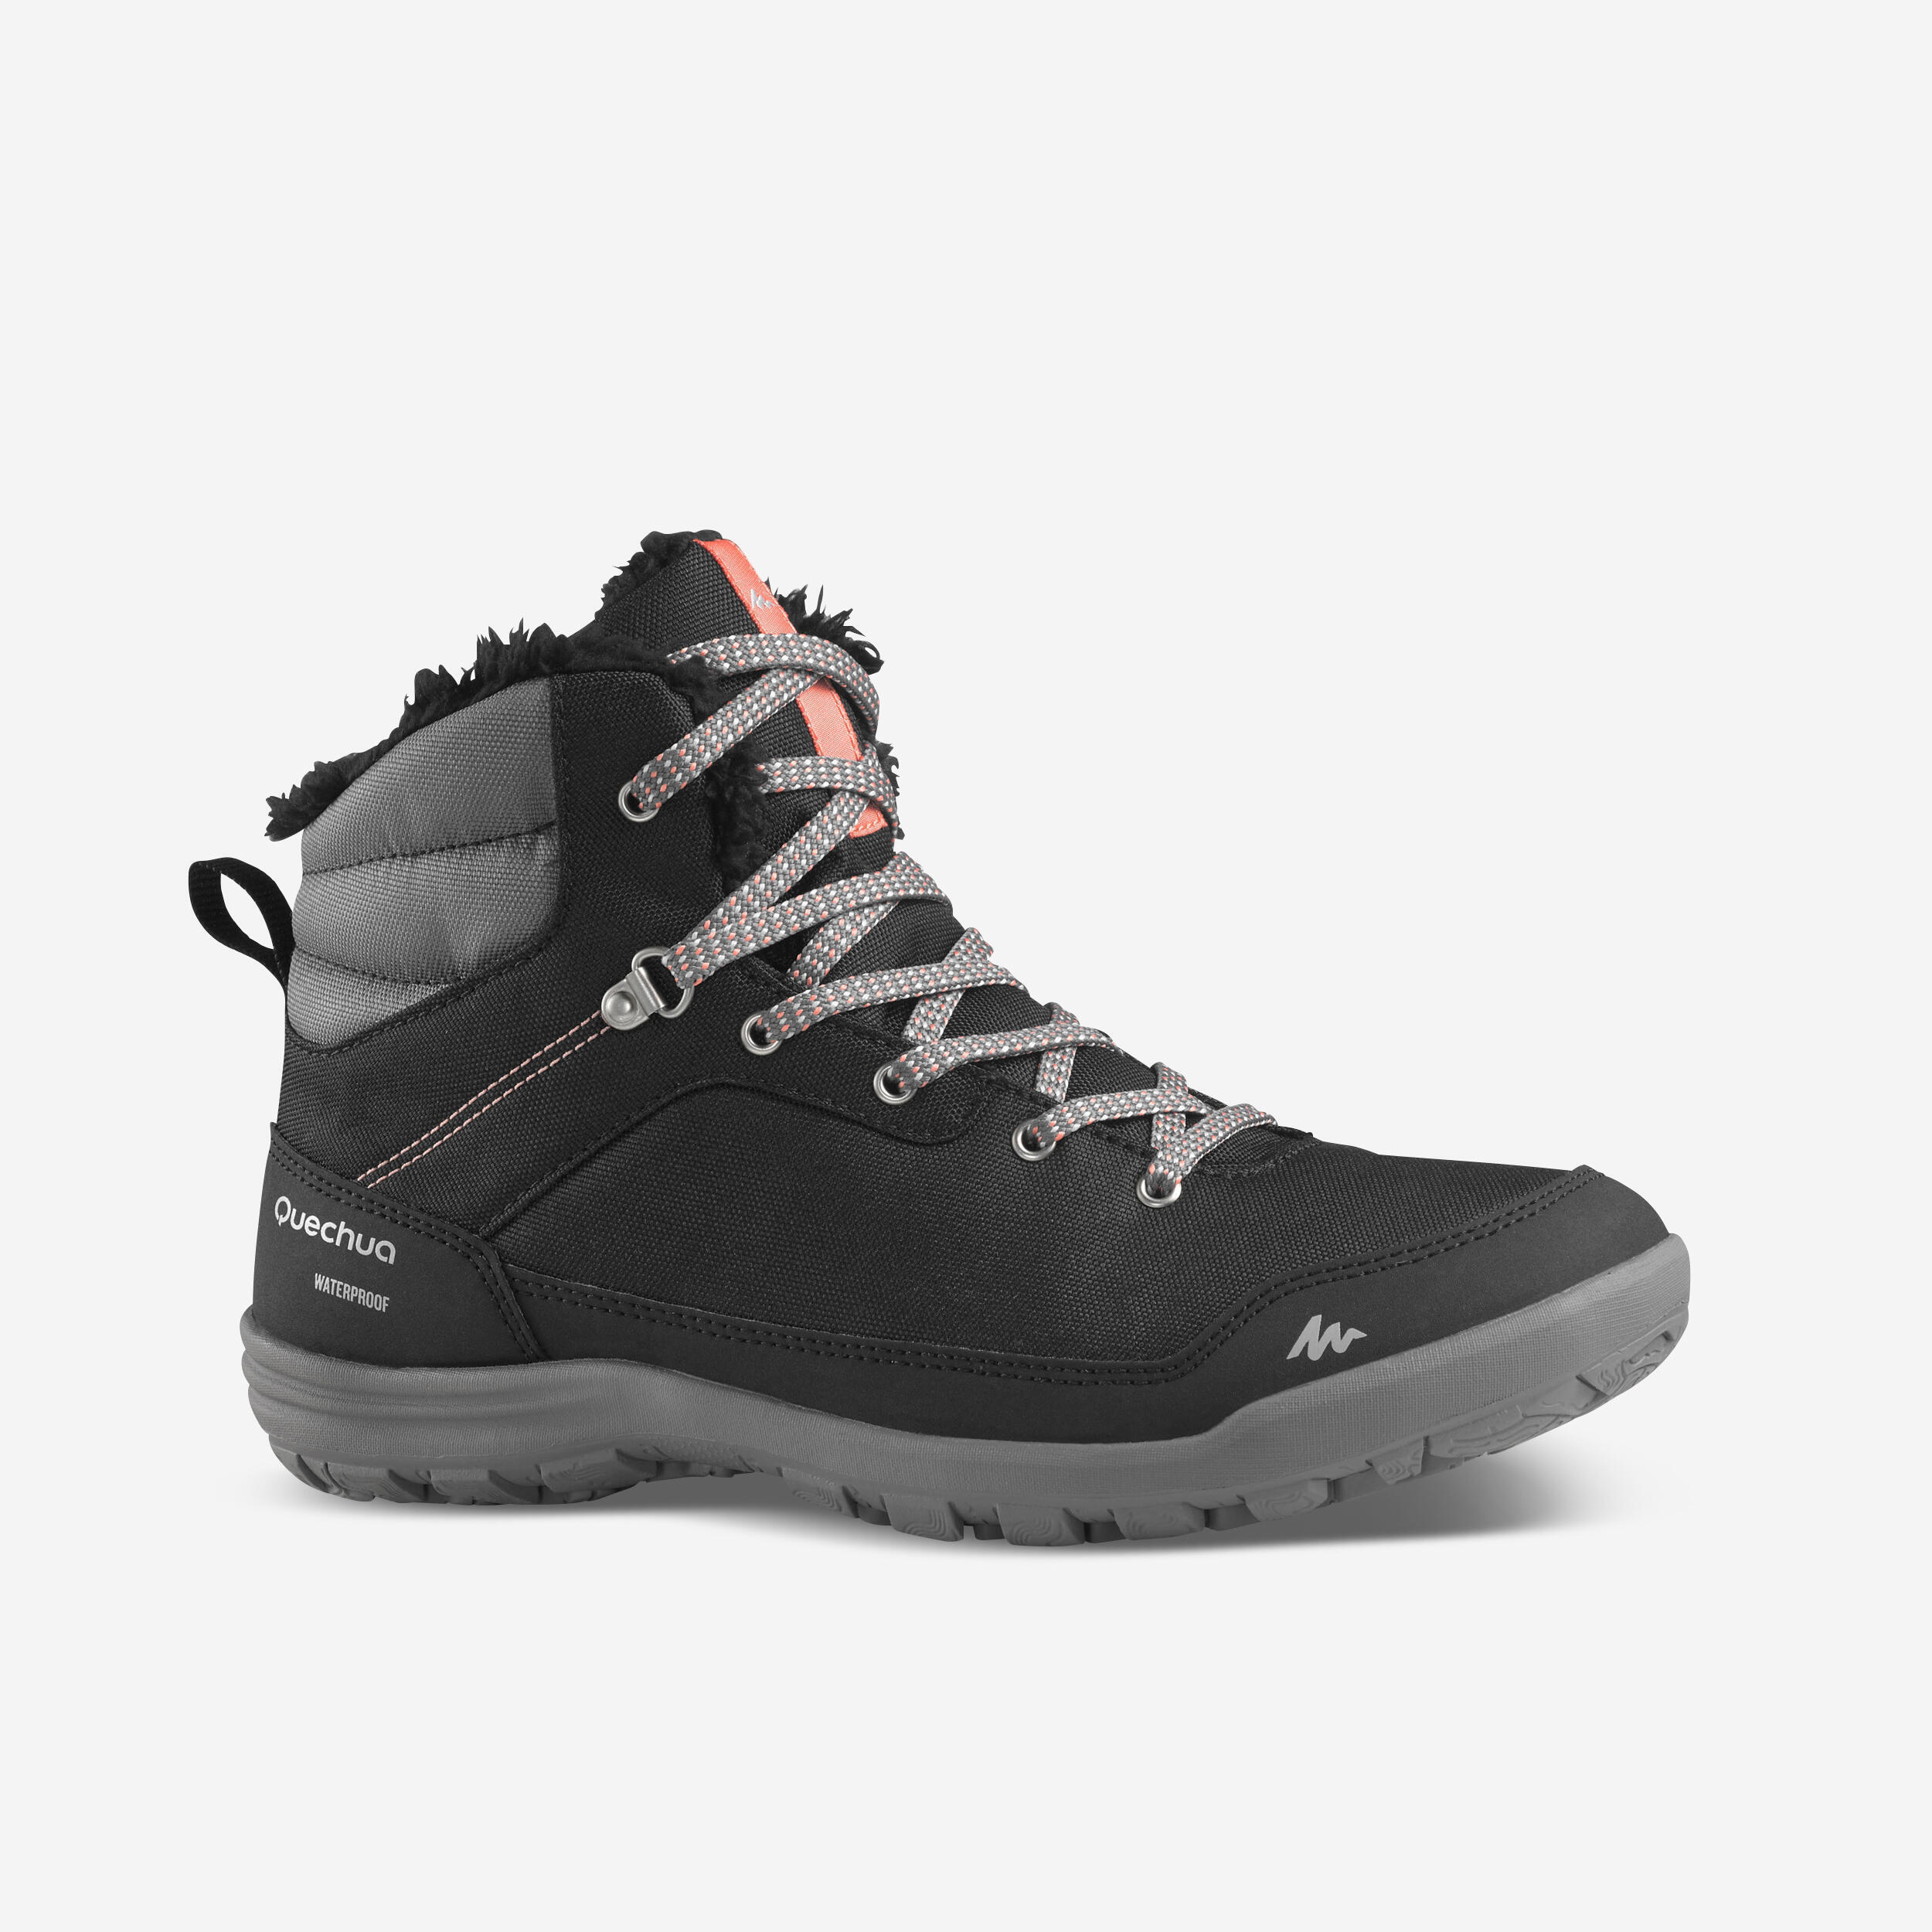 Women’s Warm and Waterproof Hiking Boots - SH100 MID 1/7